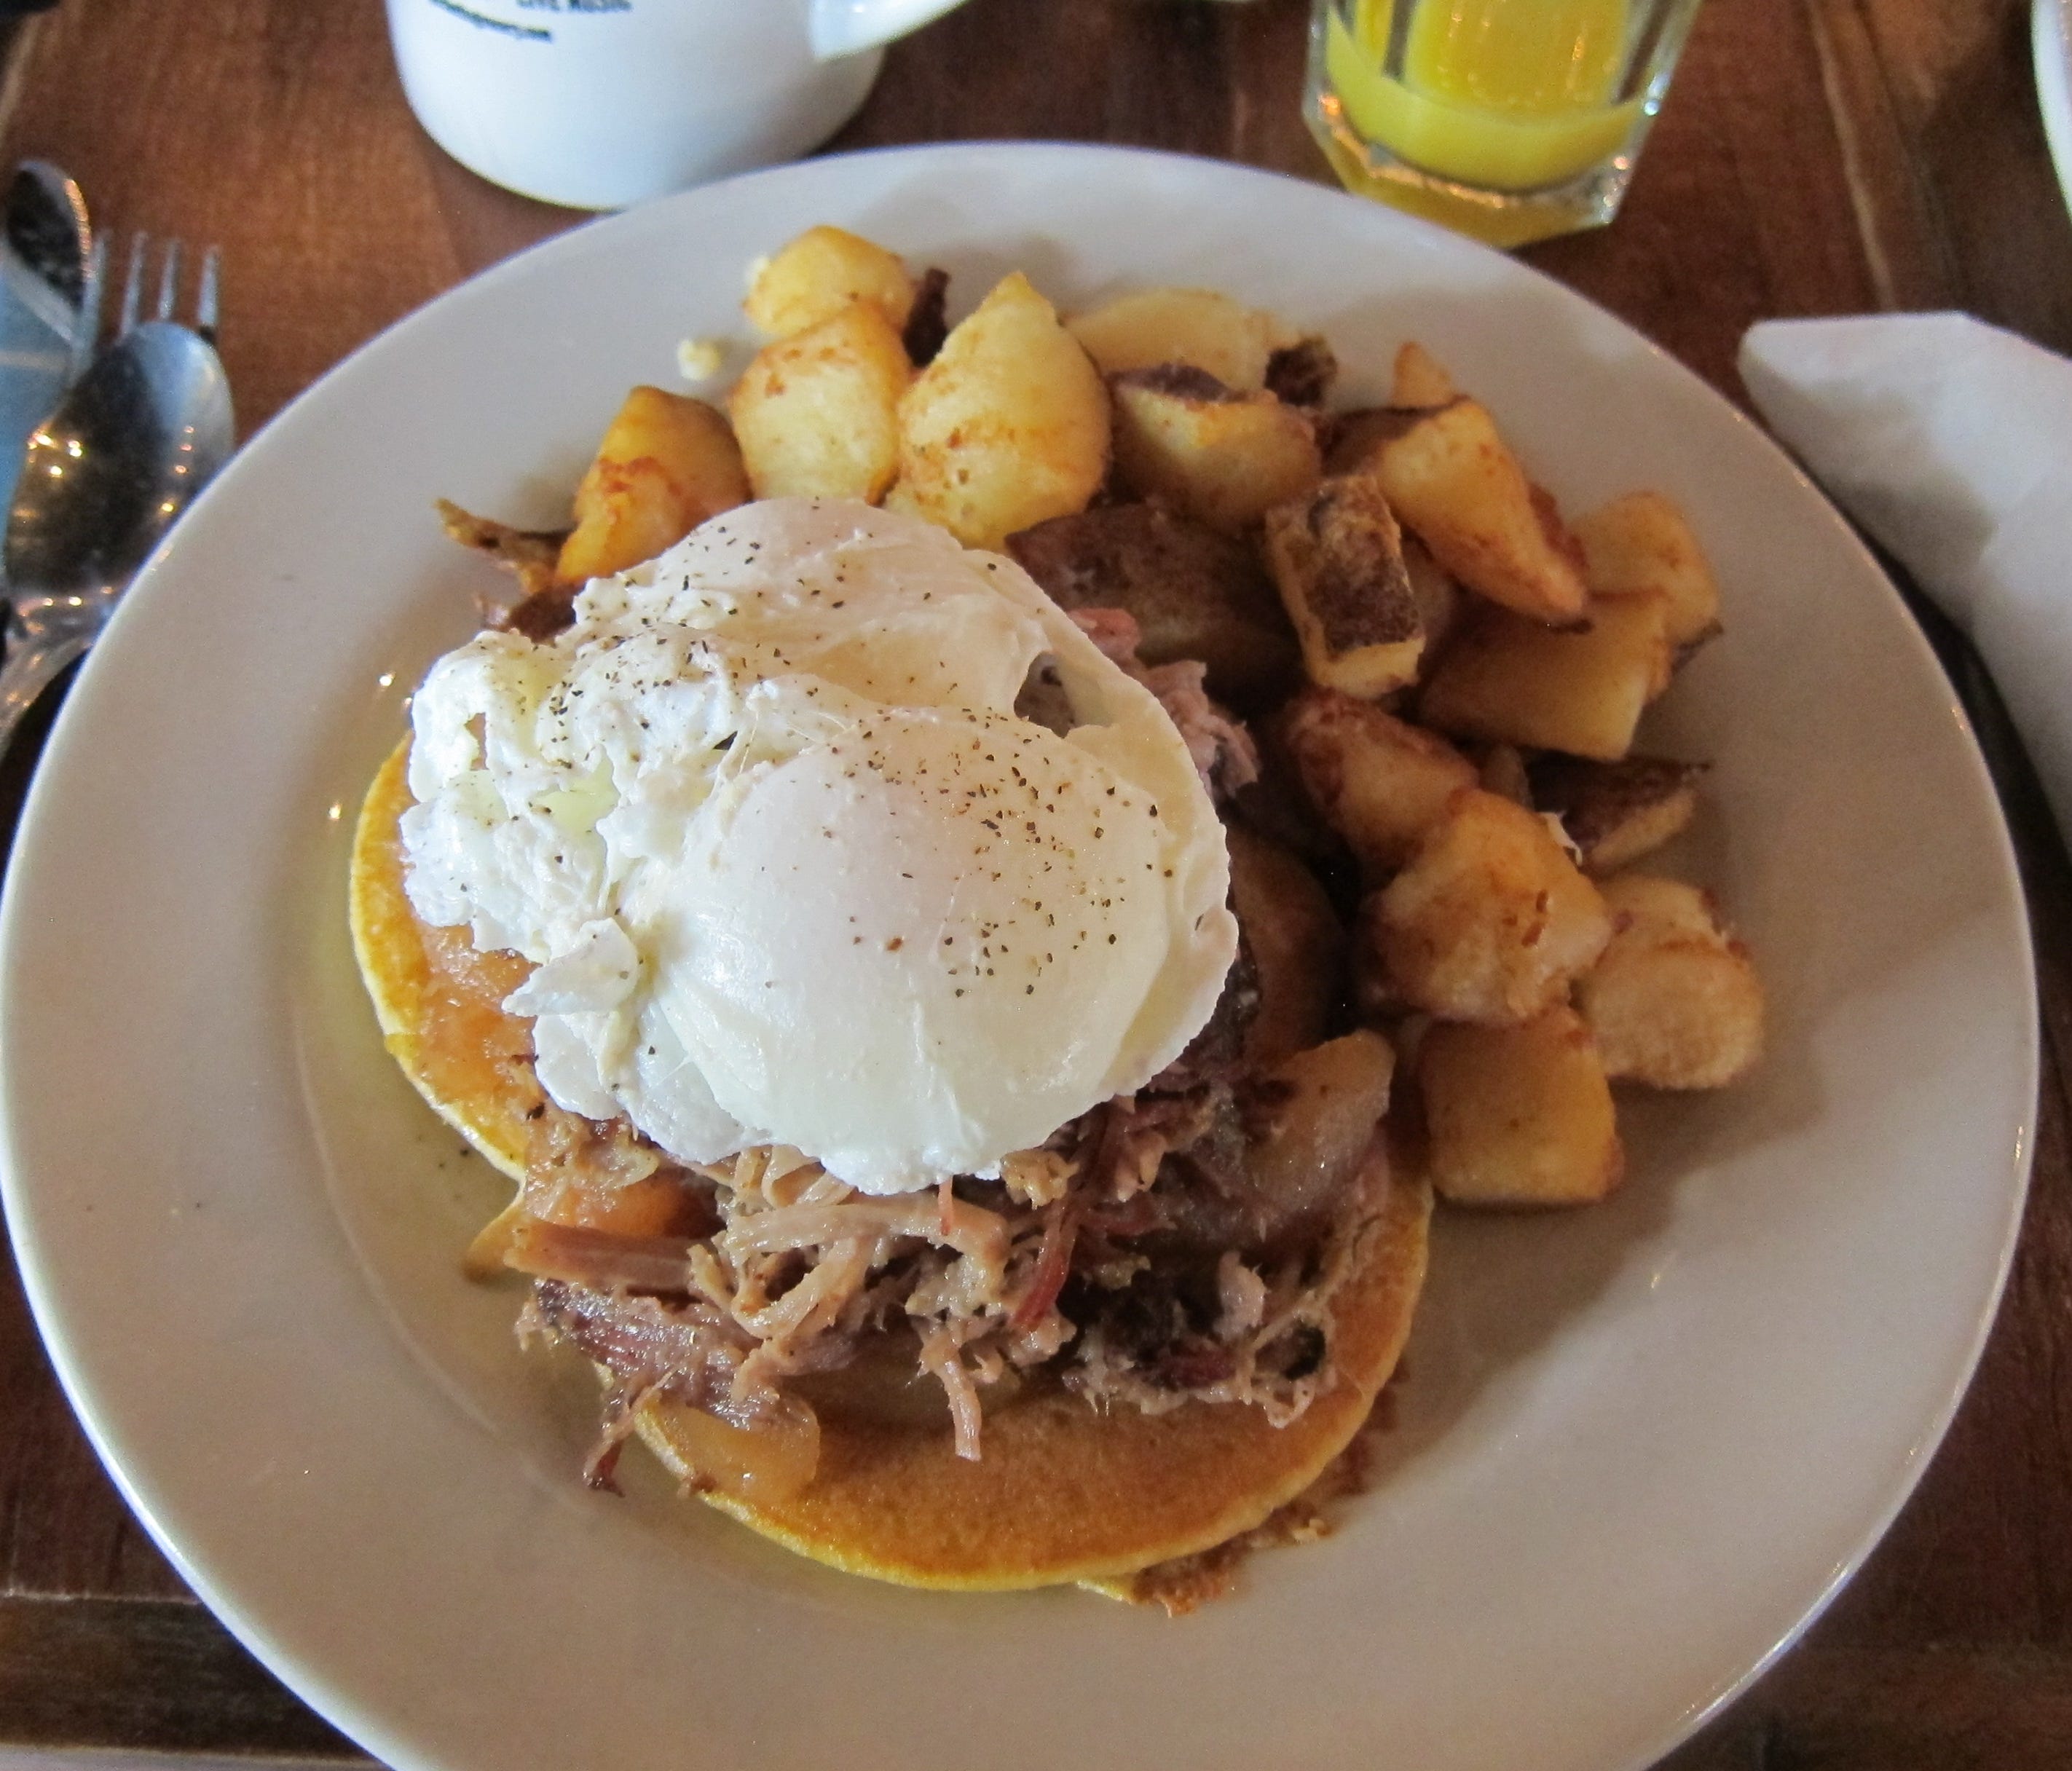 Puckett's Southern Stack is pulled pork over sweet potato pancakes with fried apples and an egg.